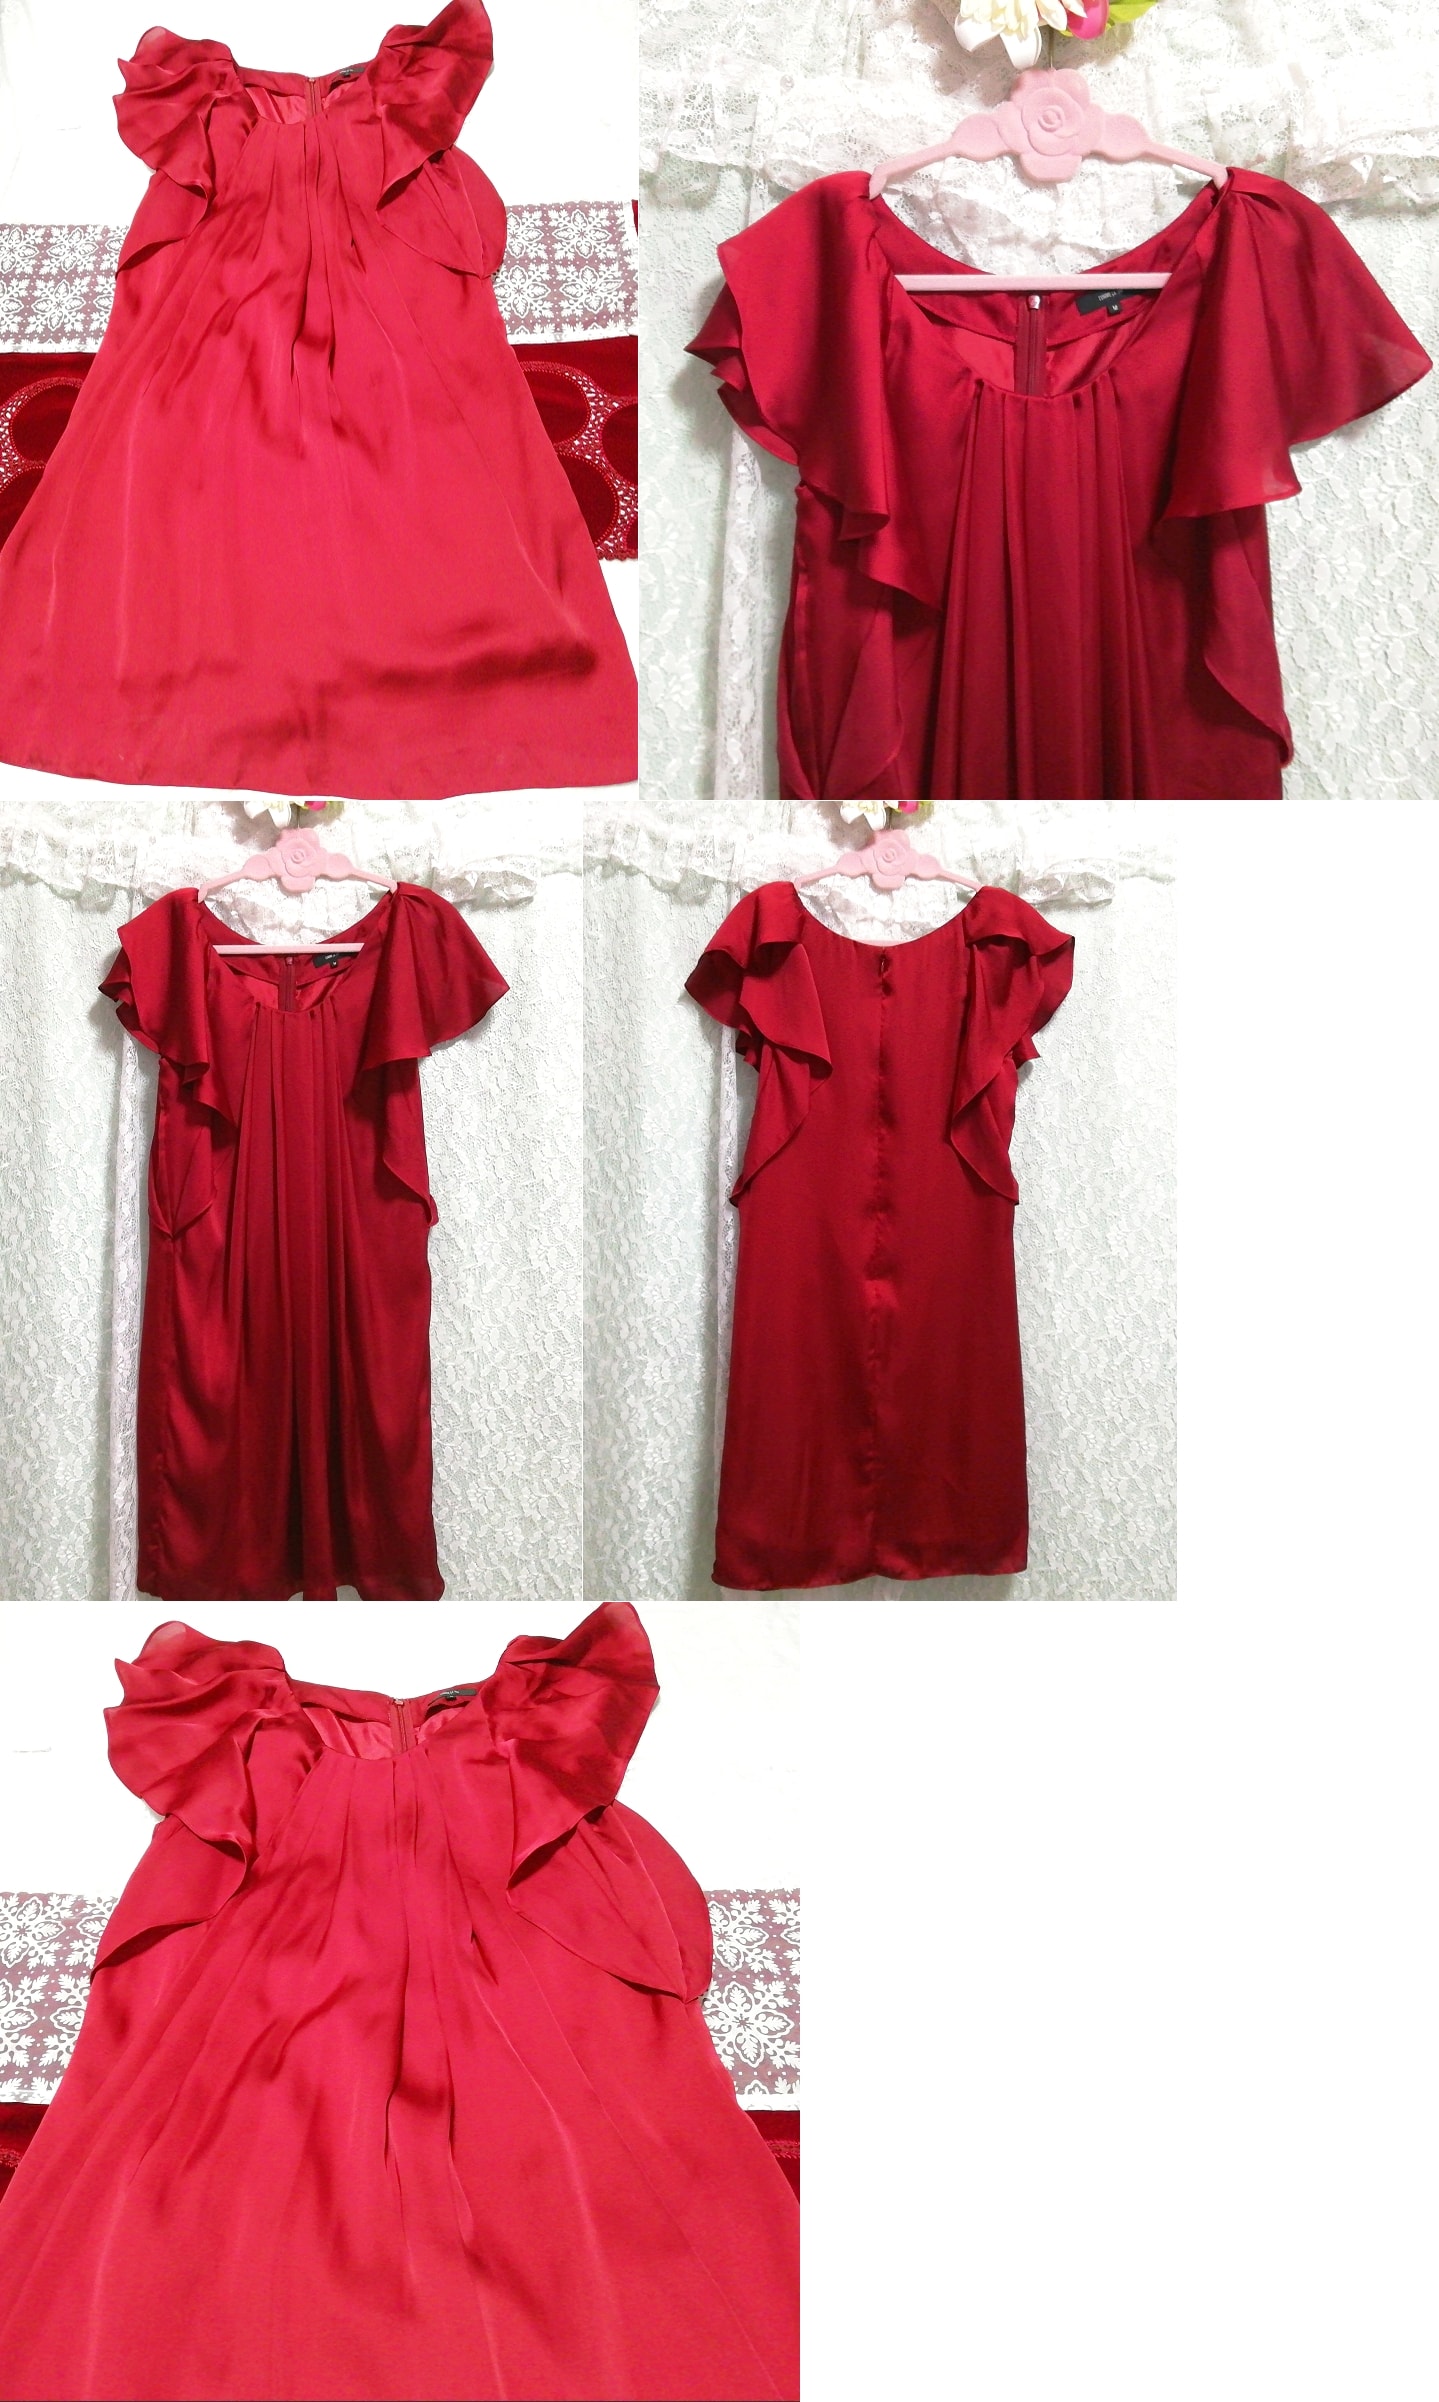 red satin tunic negligee nightgown dress, knee length skirt, m size